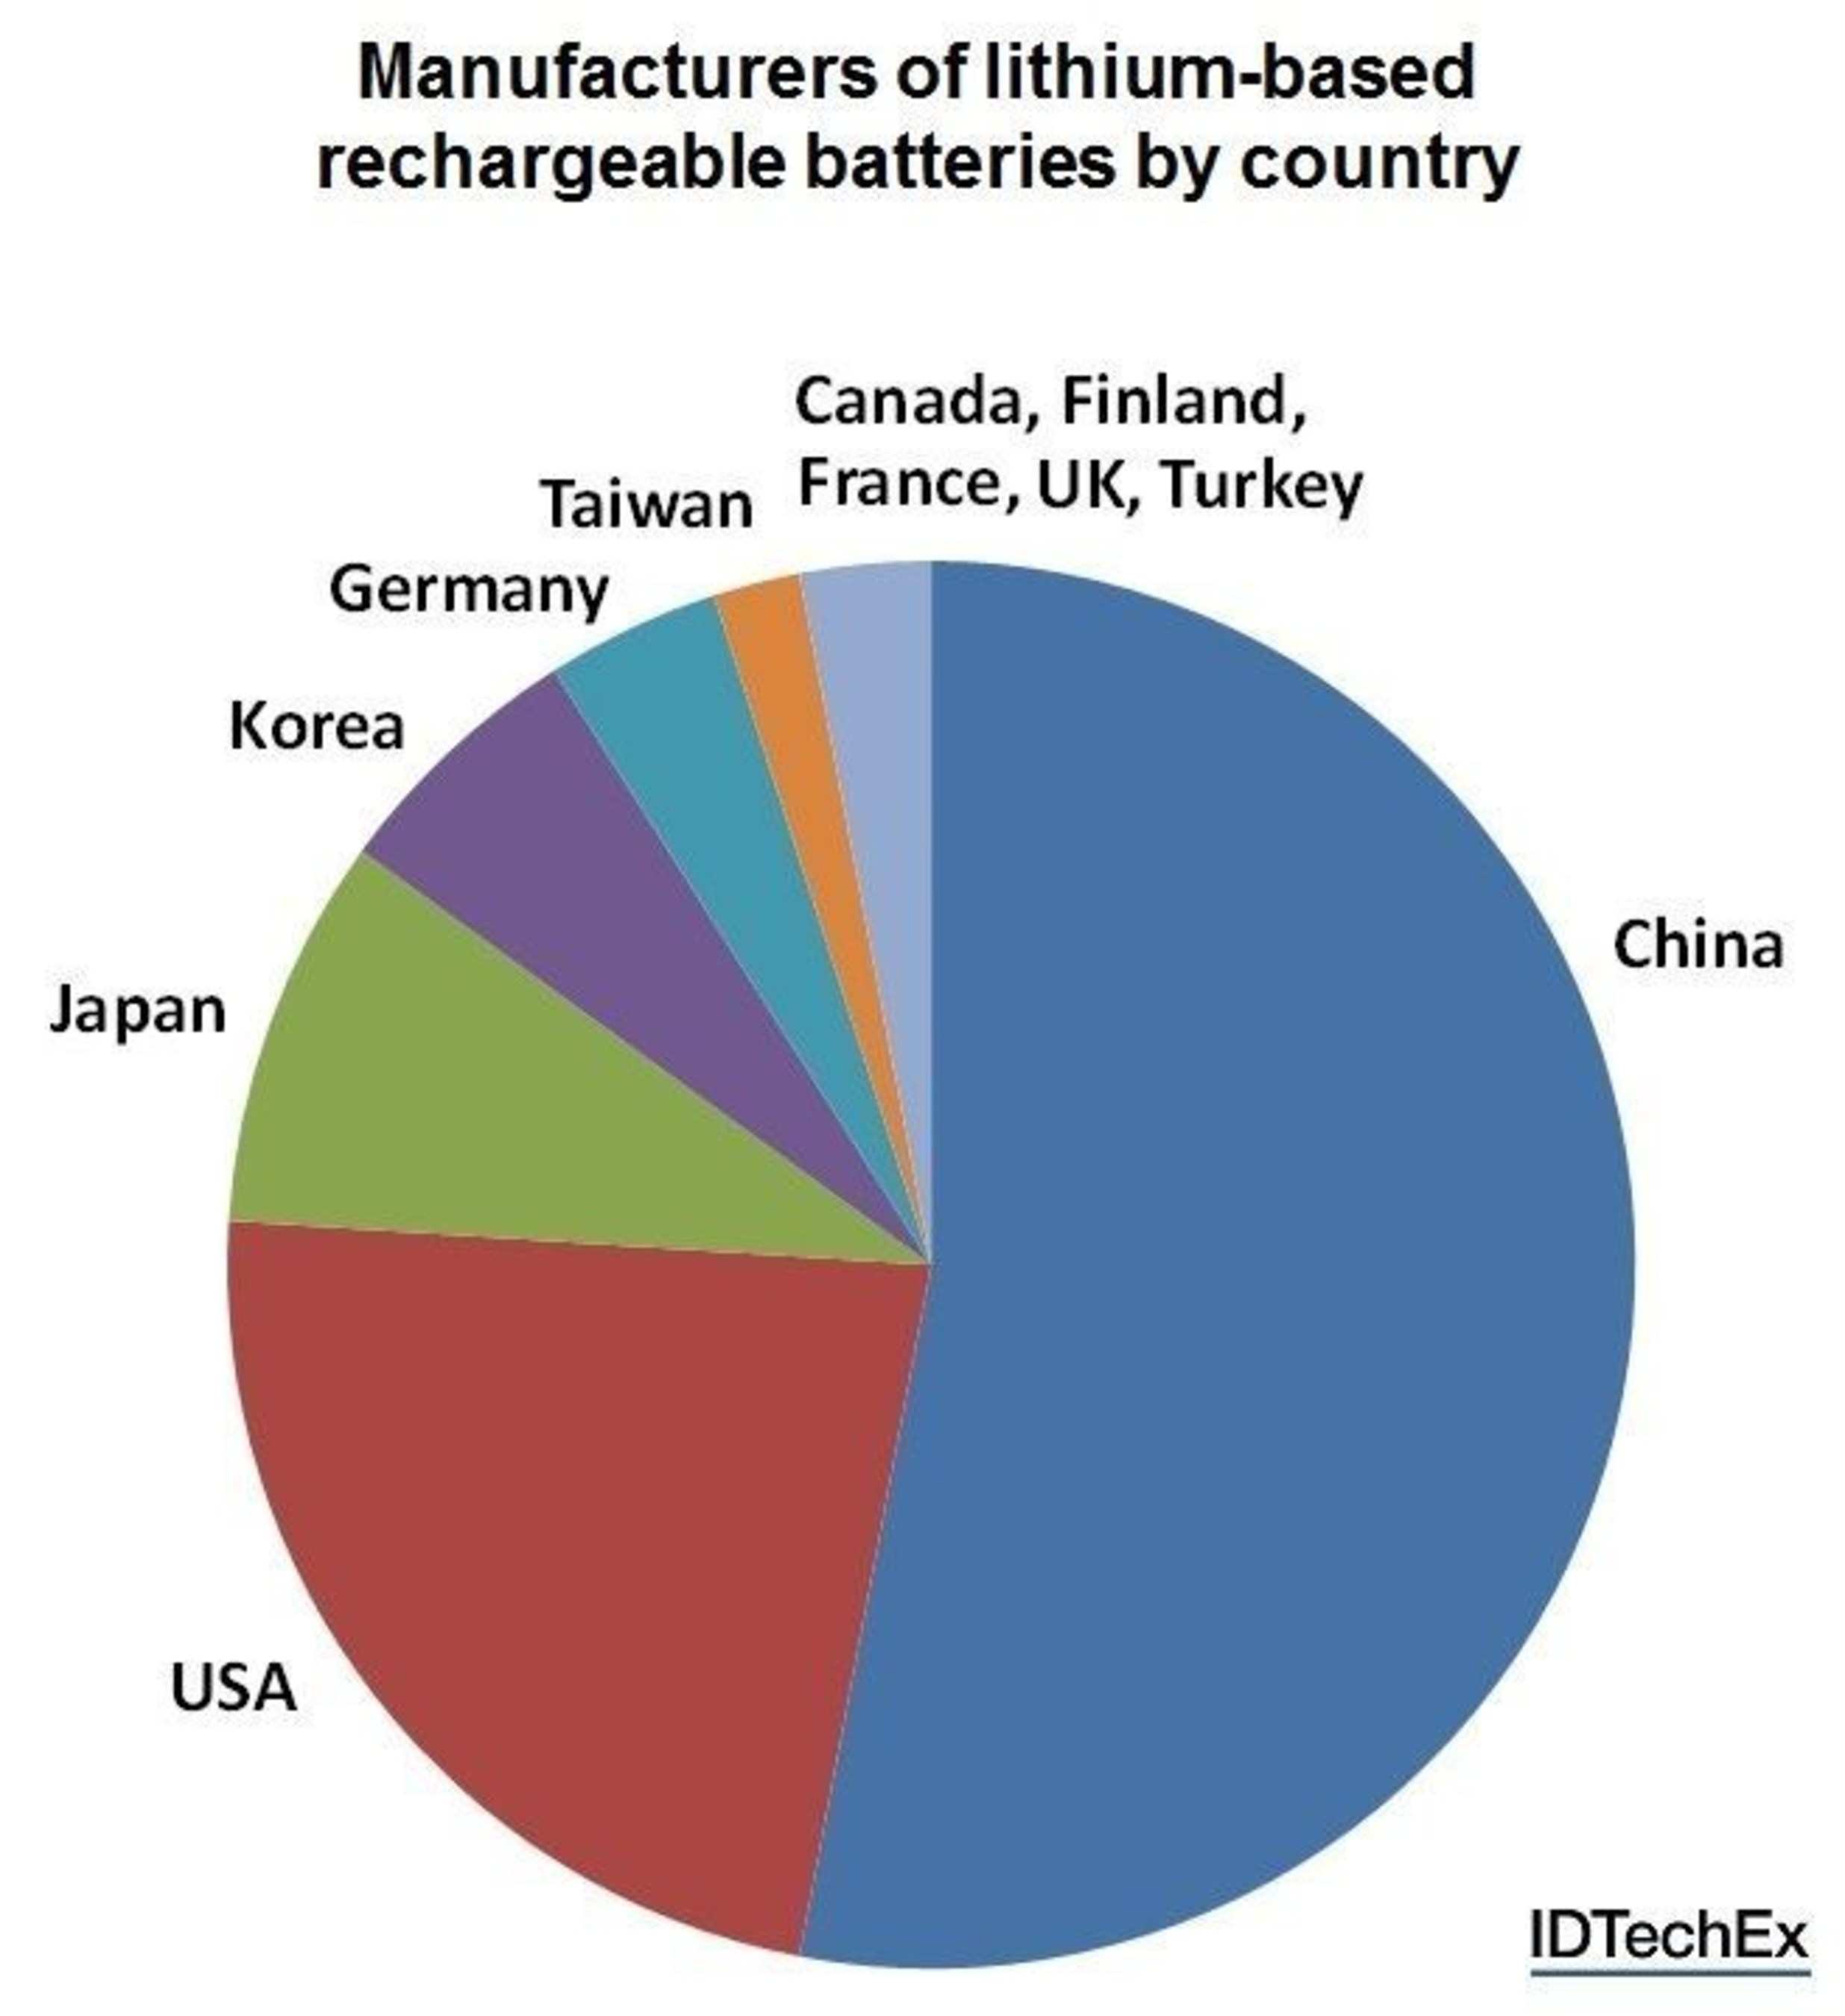 Manufacturers of lithium-based rechargeable batteries by country. Source: IDTechEx Research report Lithium-ion Batteries 2016-2026 (www.IDTechEx.com/lithium). (PRNewsFoto/IDTechEx)